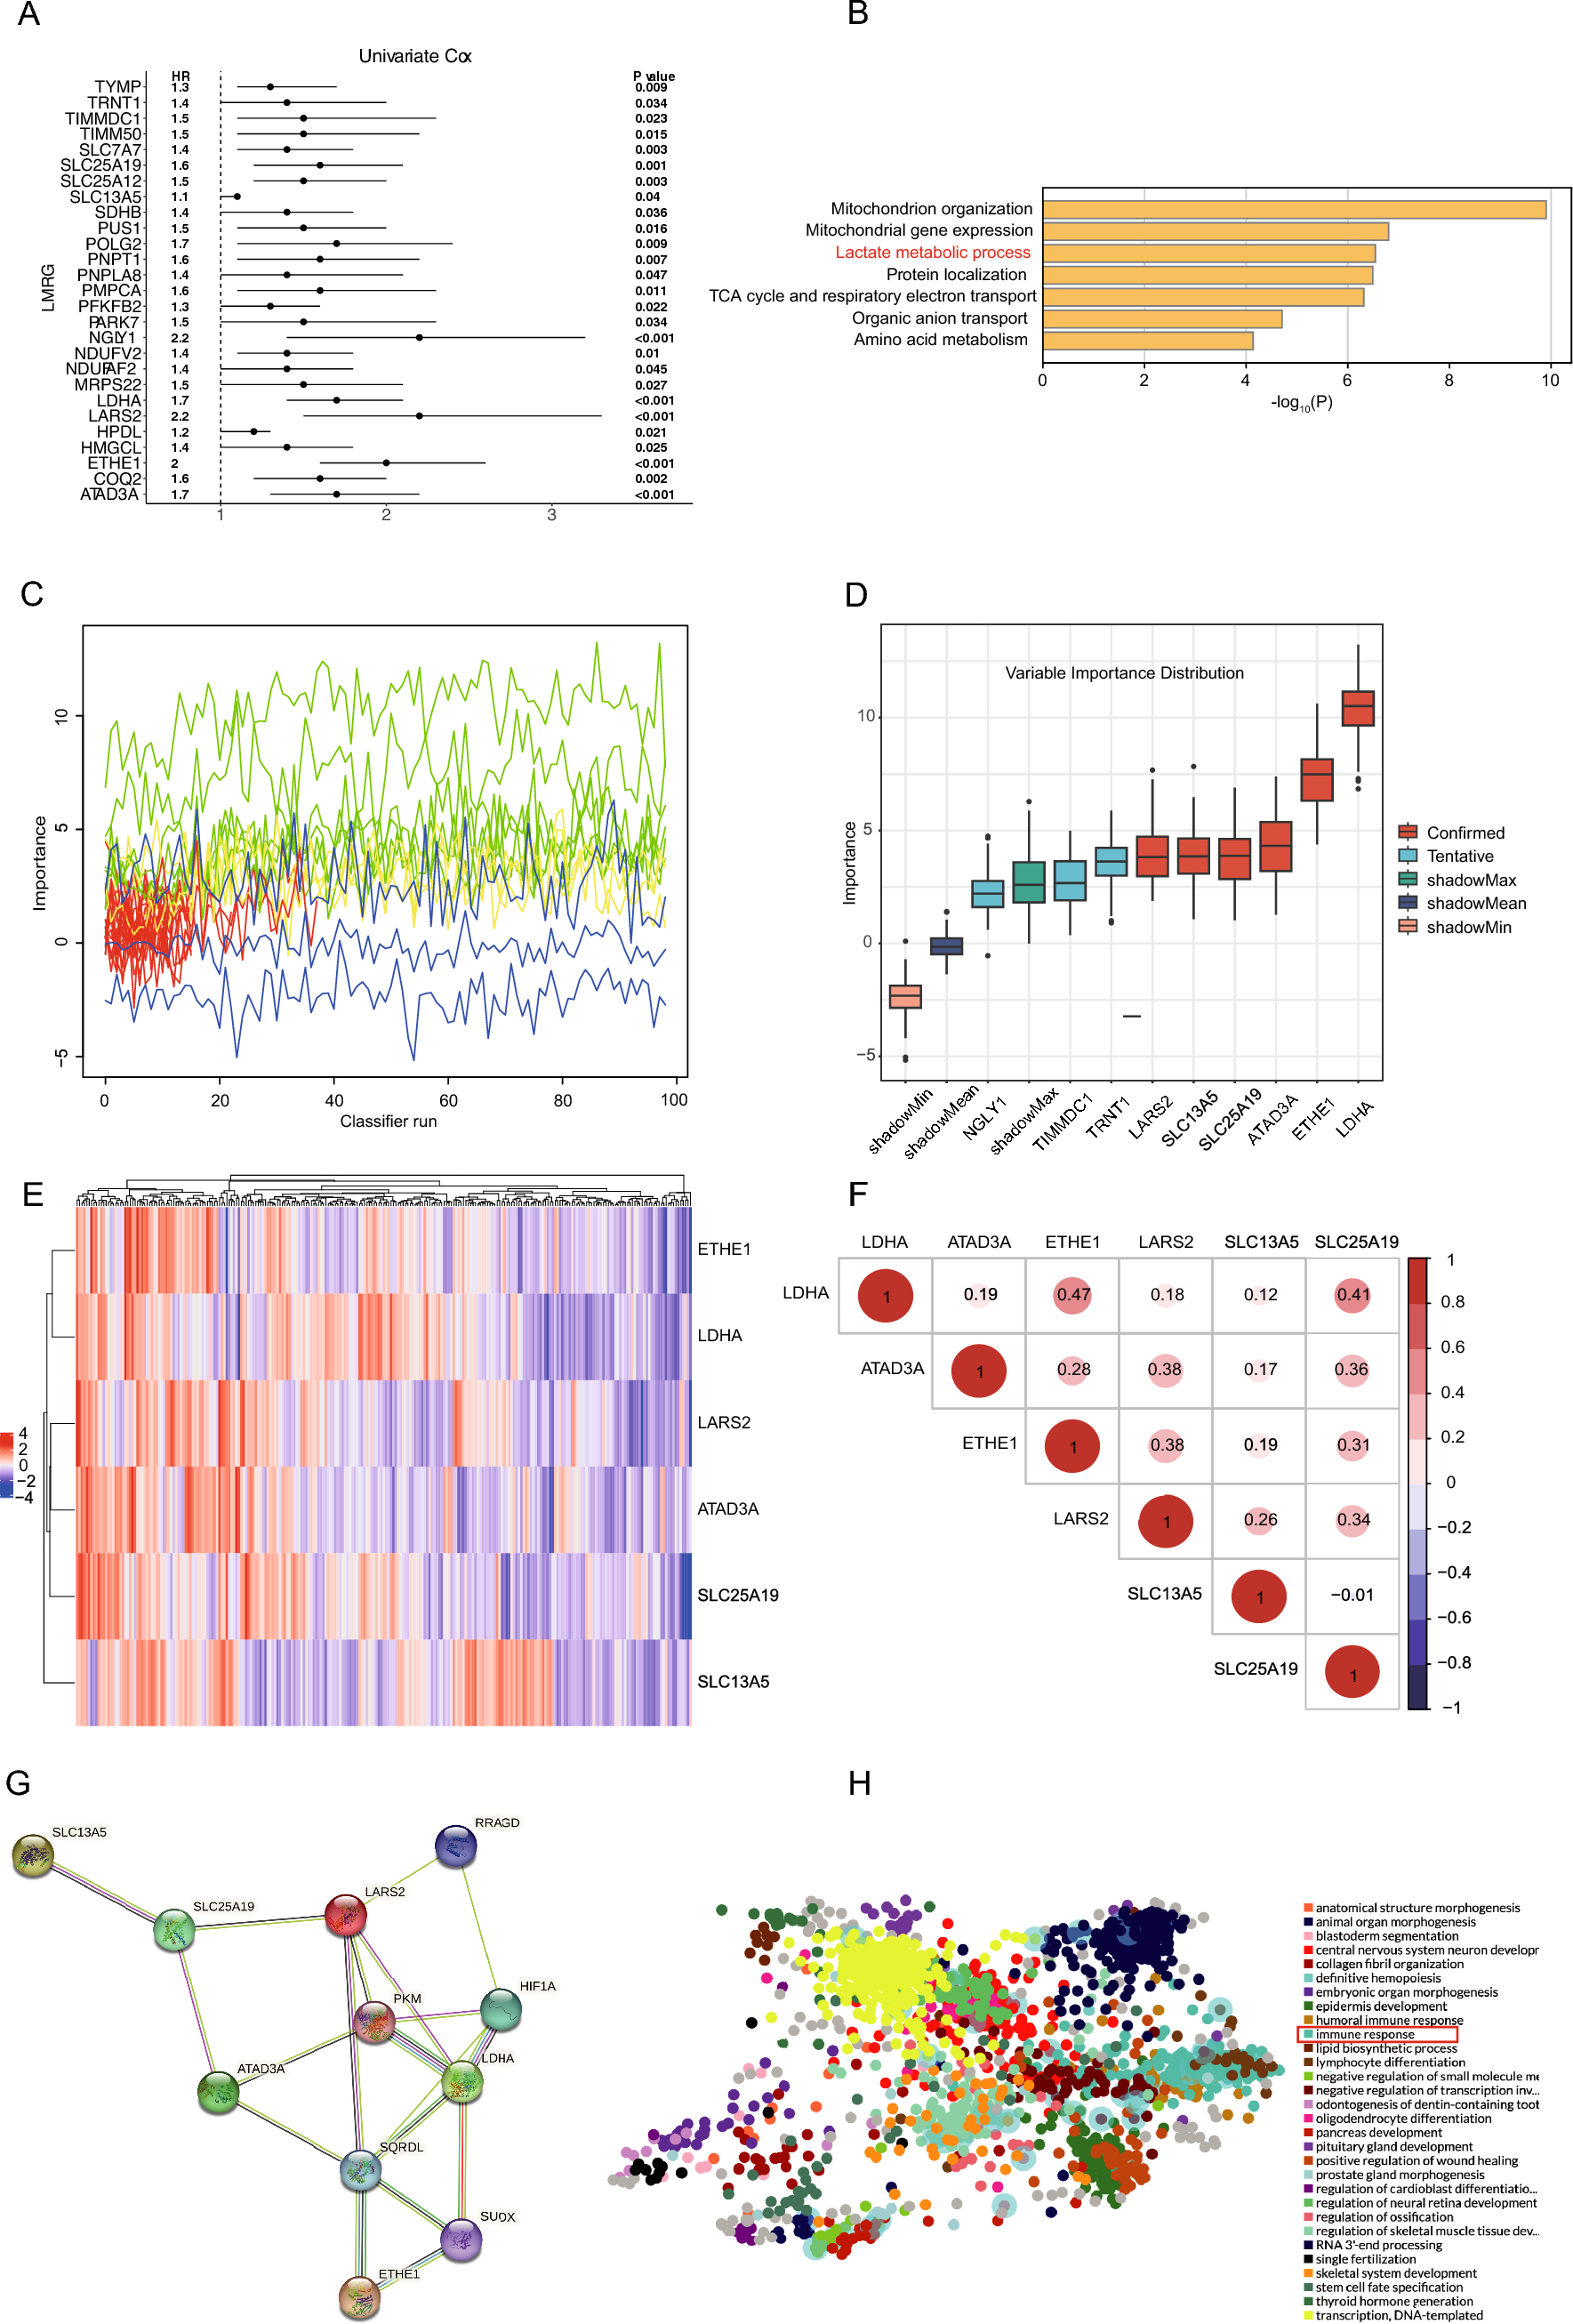 Identification and validation of a lactate metabolism-related six-gene prognostic signature in intrahepatic cholangiocarcinoma